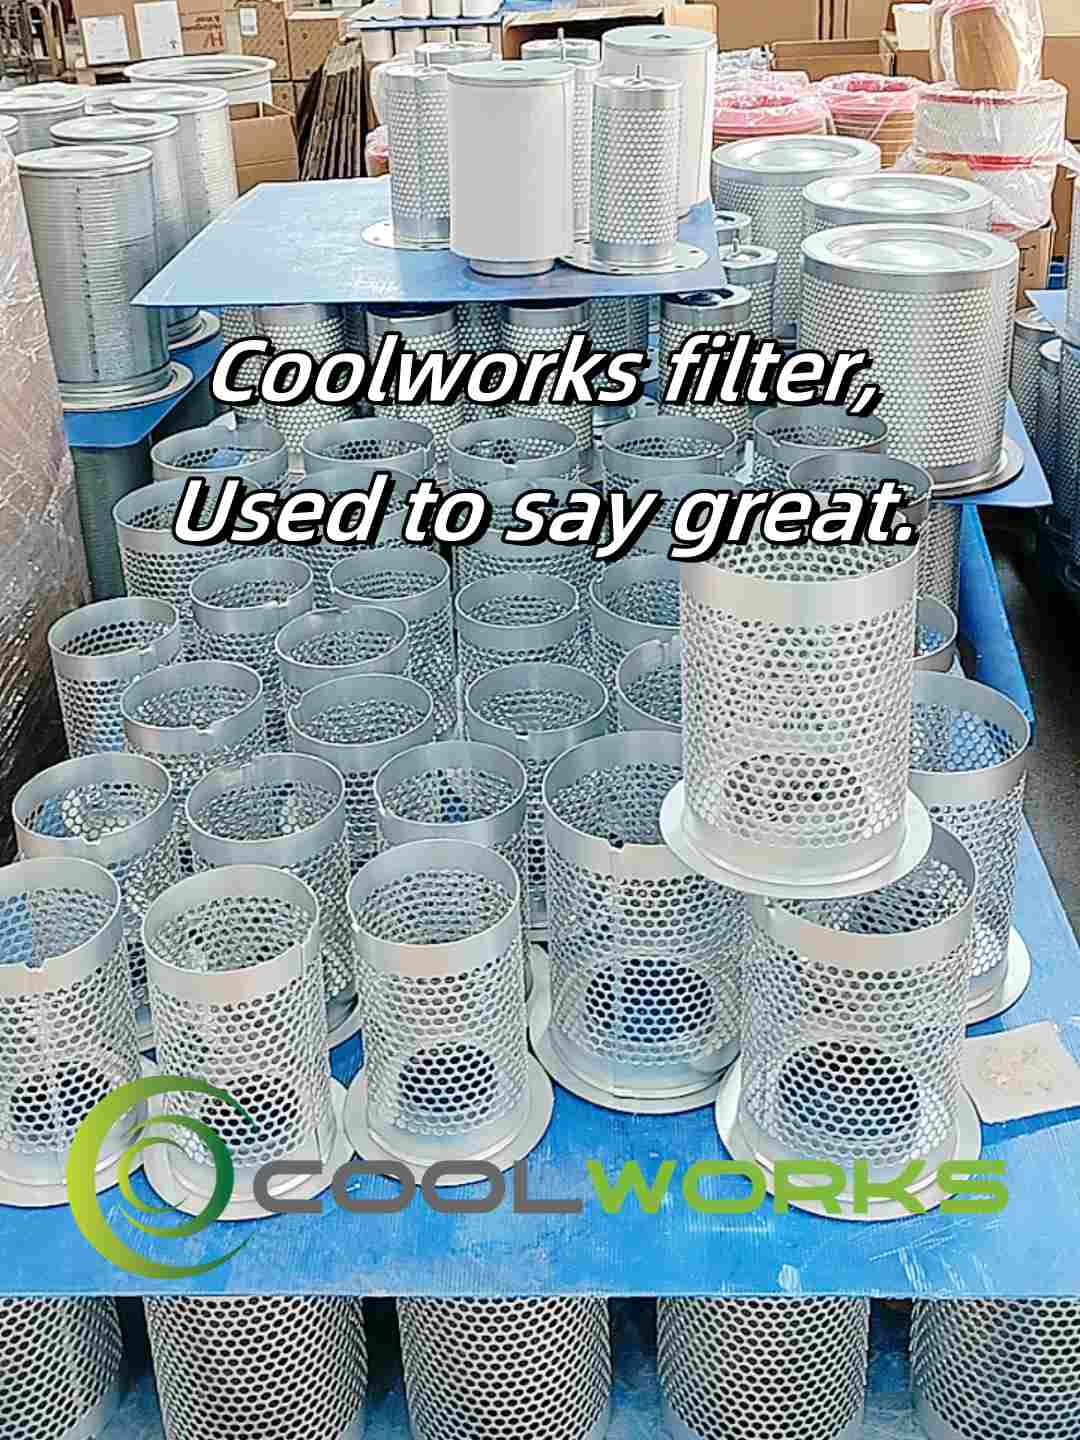 Discover great products - Coolworks Filters!